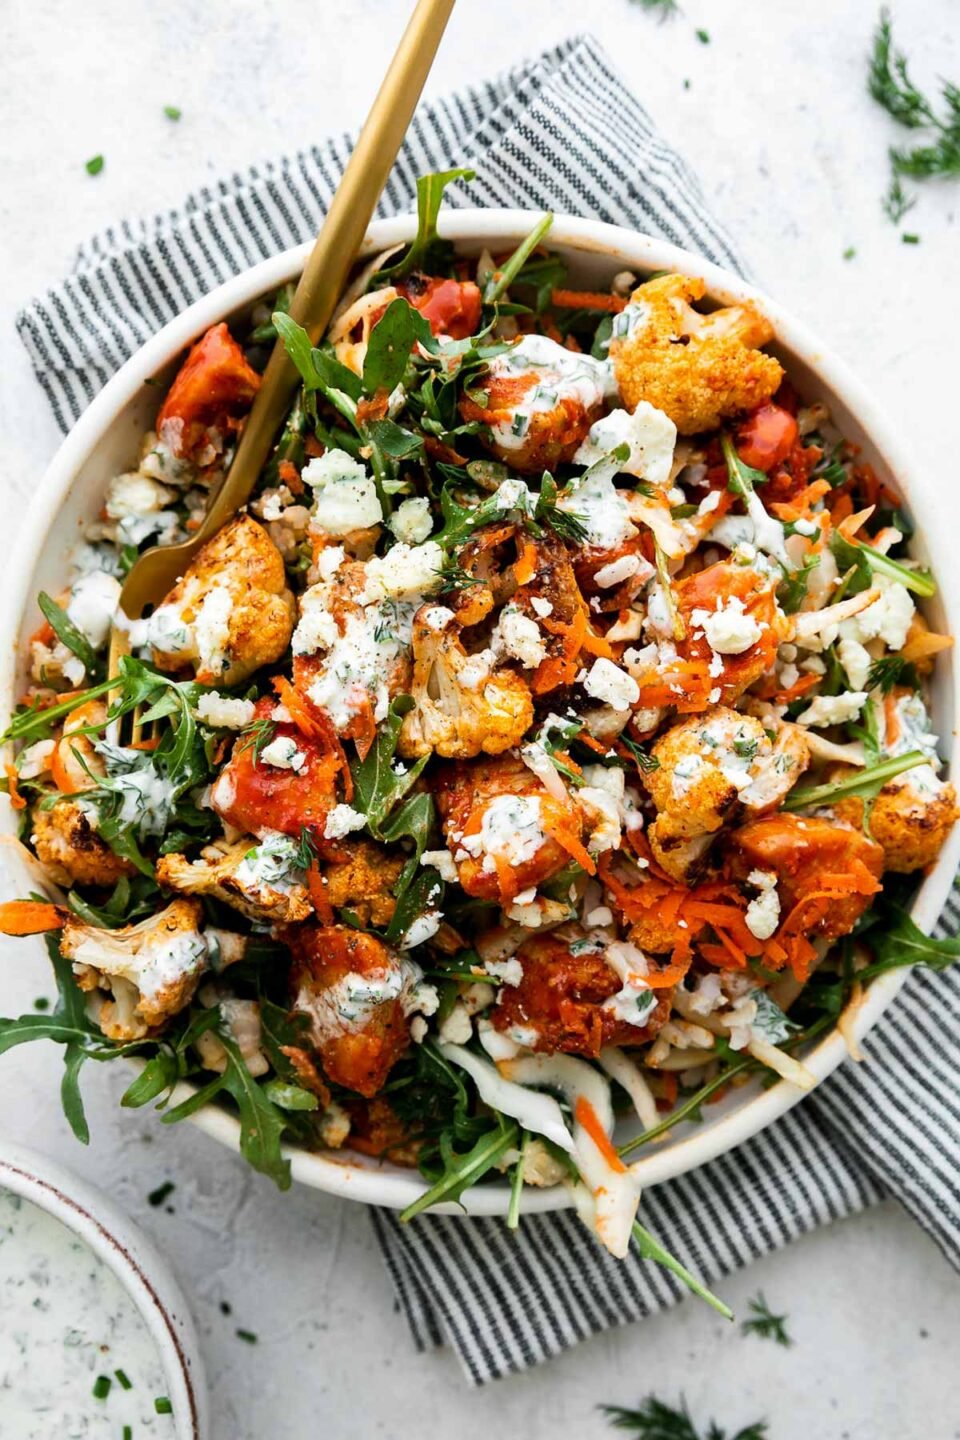 An overhead shot of an assembled & finished Hearty Buffalo Chicken bowl. The bowl is made with cooked brown rice, a bed of arugula, finely shredded cabbage, easy skillet buffalo chicken, roasted cauliflower, grated carrots, cheese, and herby ranch yogurt drizzle over top. The bowls sits atop a creamy white textured surface with a blue and white striped linen napkin resting underneath. A small ceramic bowl filled with herby ranch yogurt drizzle sits alongside the bowl and a gold fork rests inside of the buffalo chicken rice bowl.